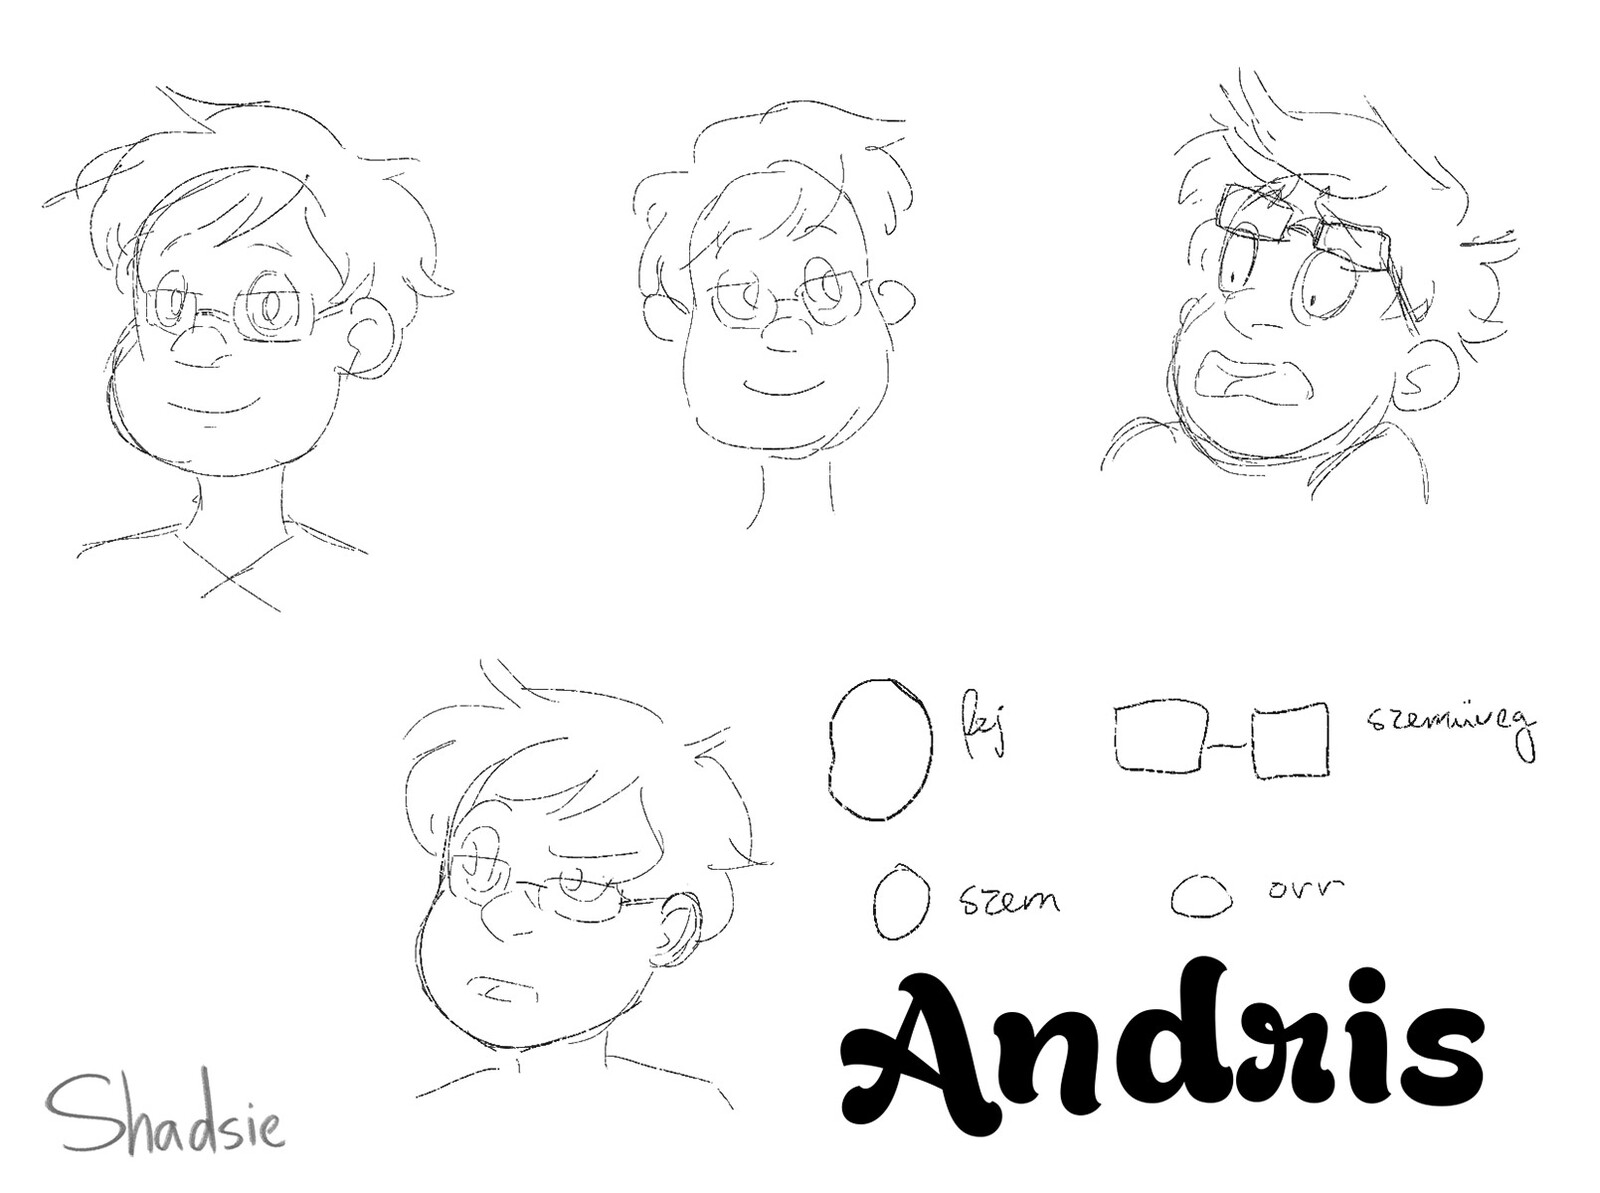 Andris character plans